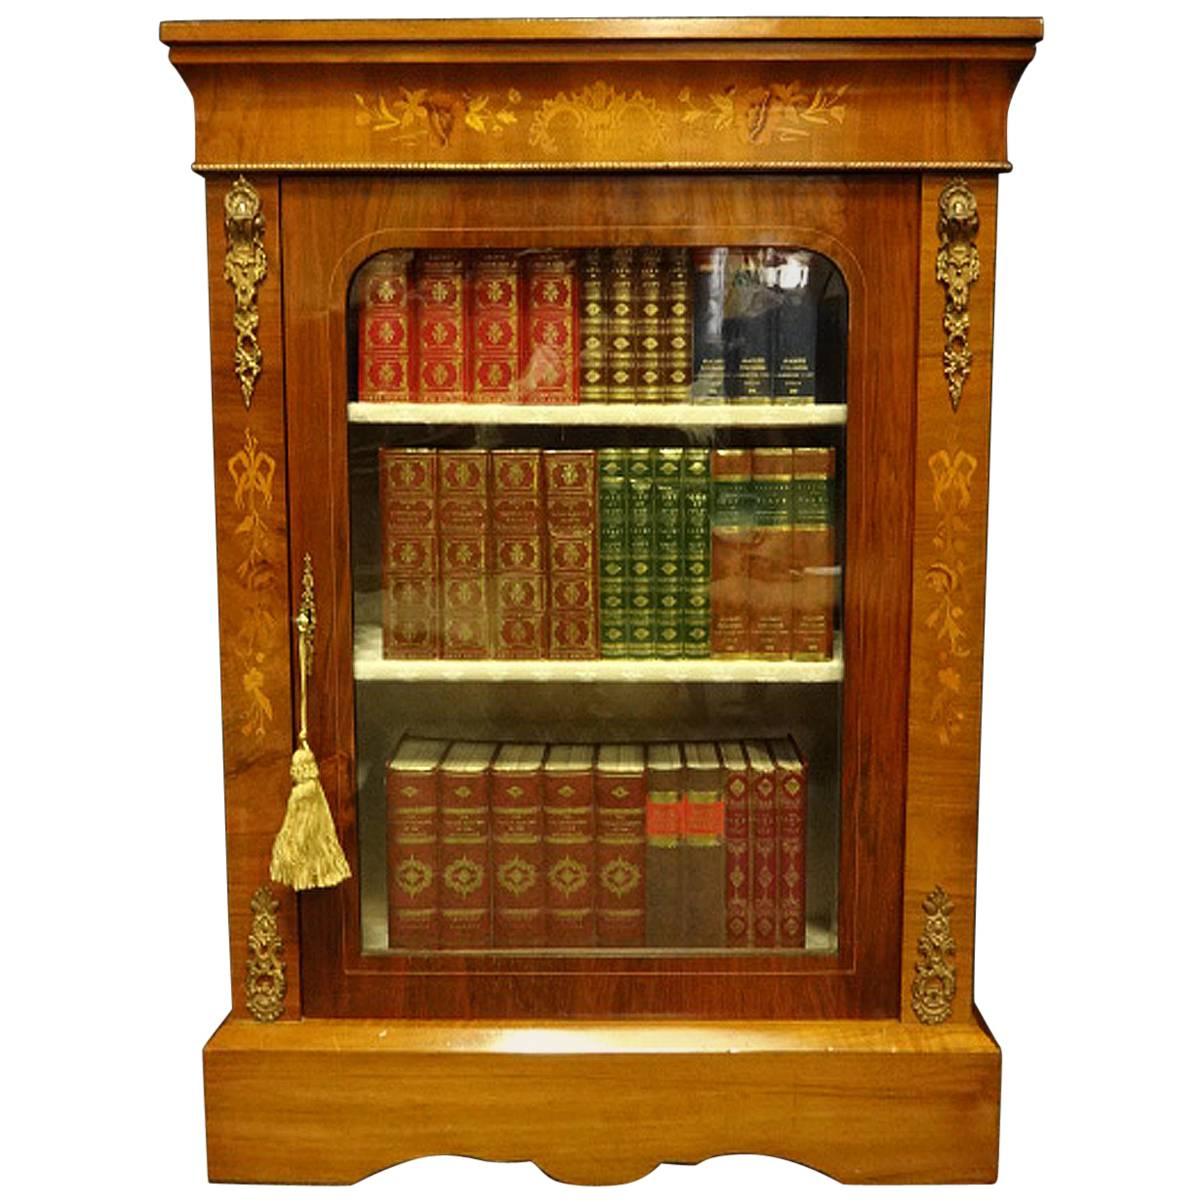  Victorian Walnut and Marquetry Inlaid Pier Cabinet Bookcase .1870